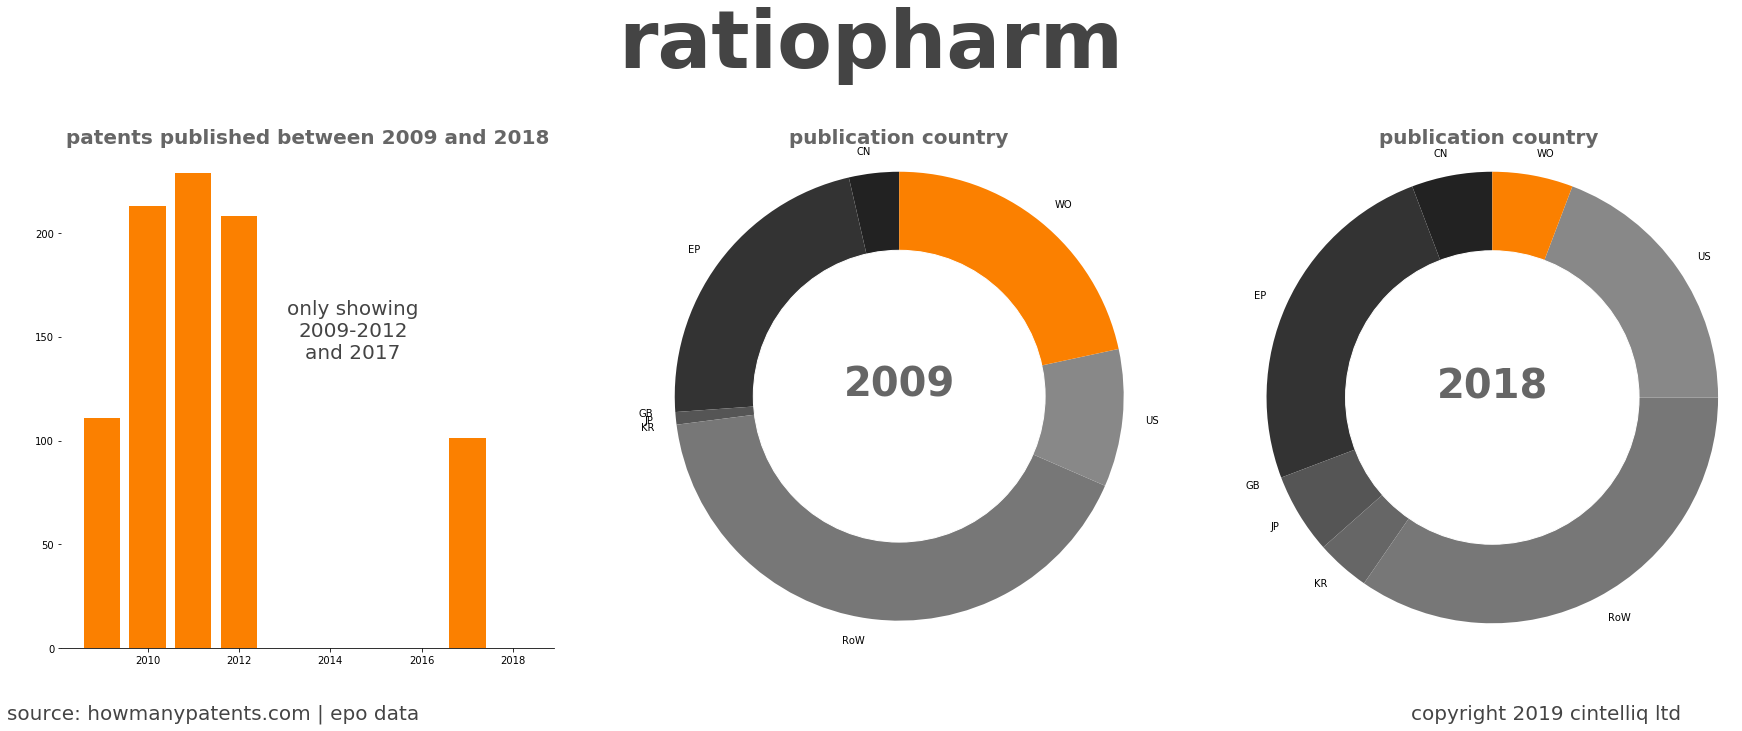 summary of patents for Ratiopharm